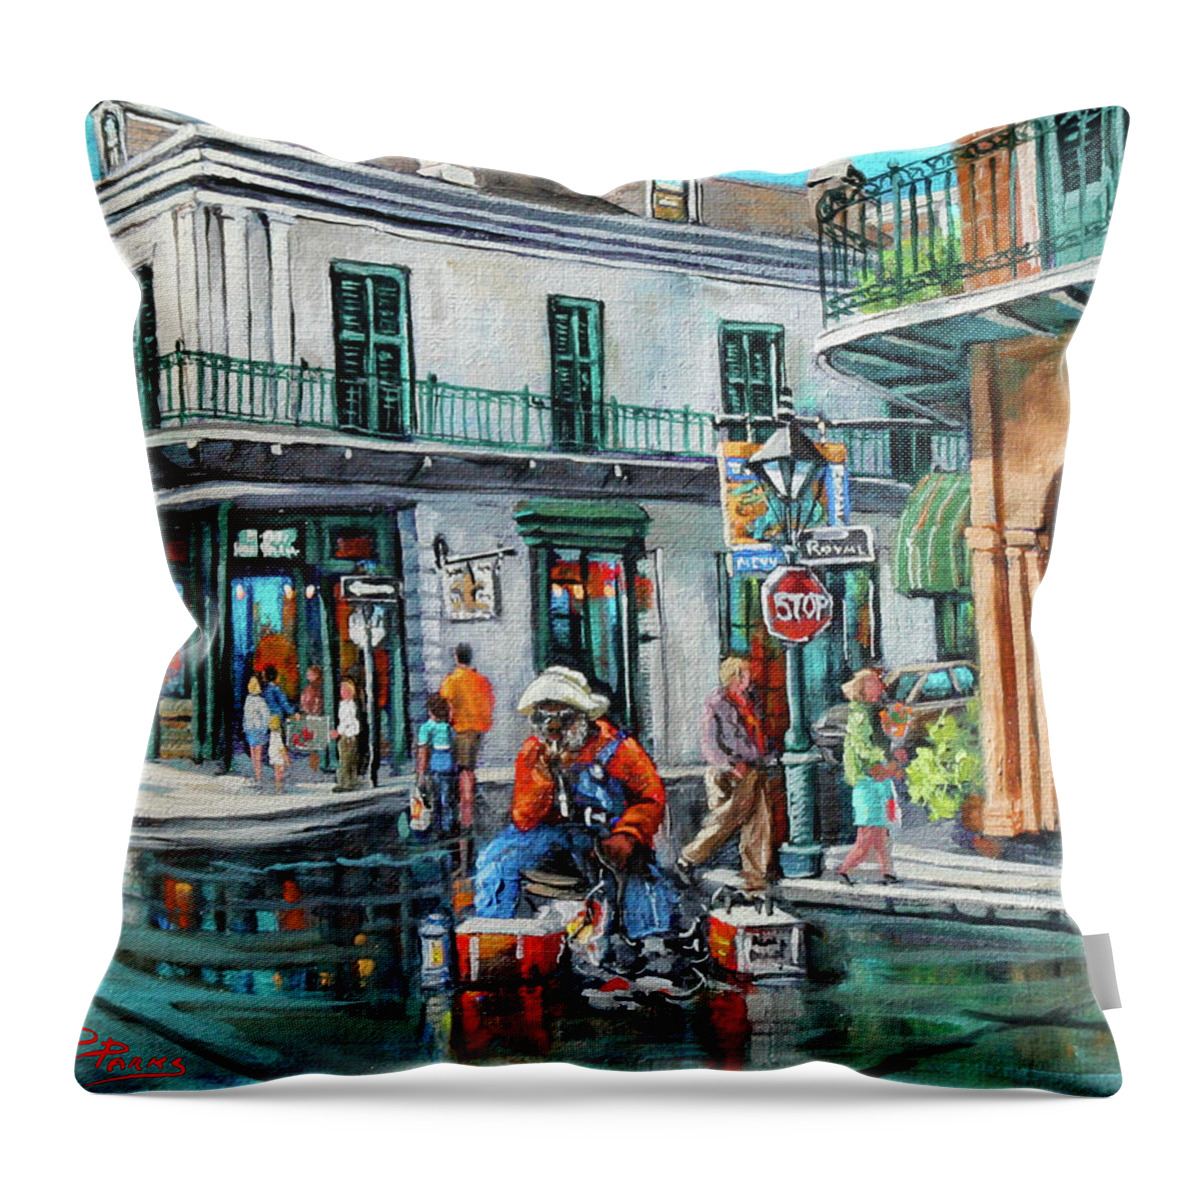  New Orleans Art Throw Pillow featuring the painting Grandpas Corner by Dianne Parks